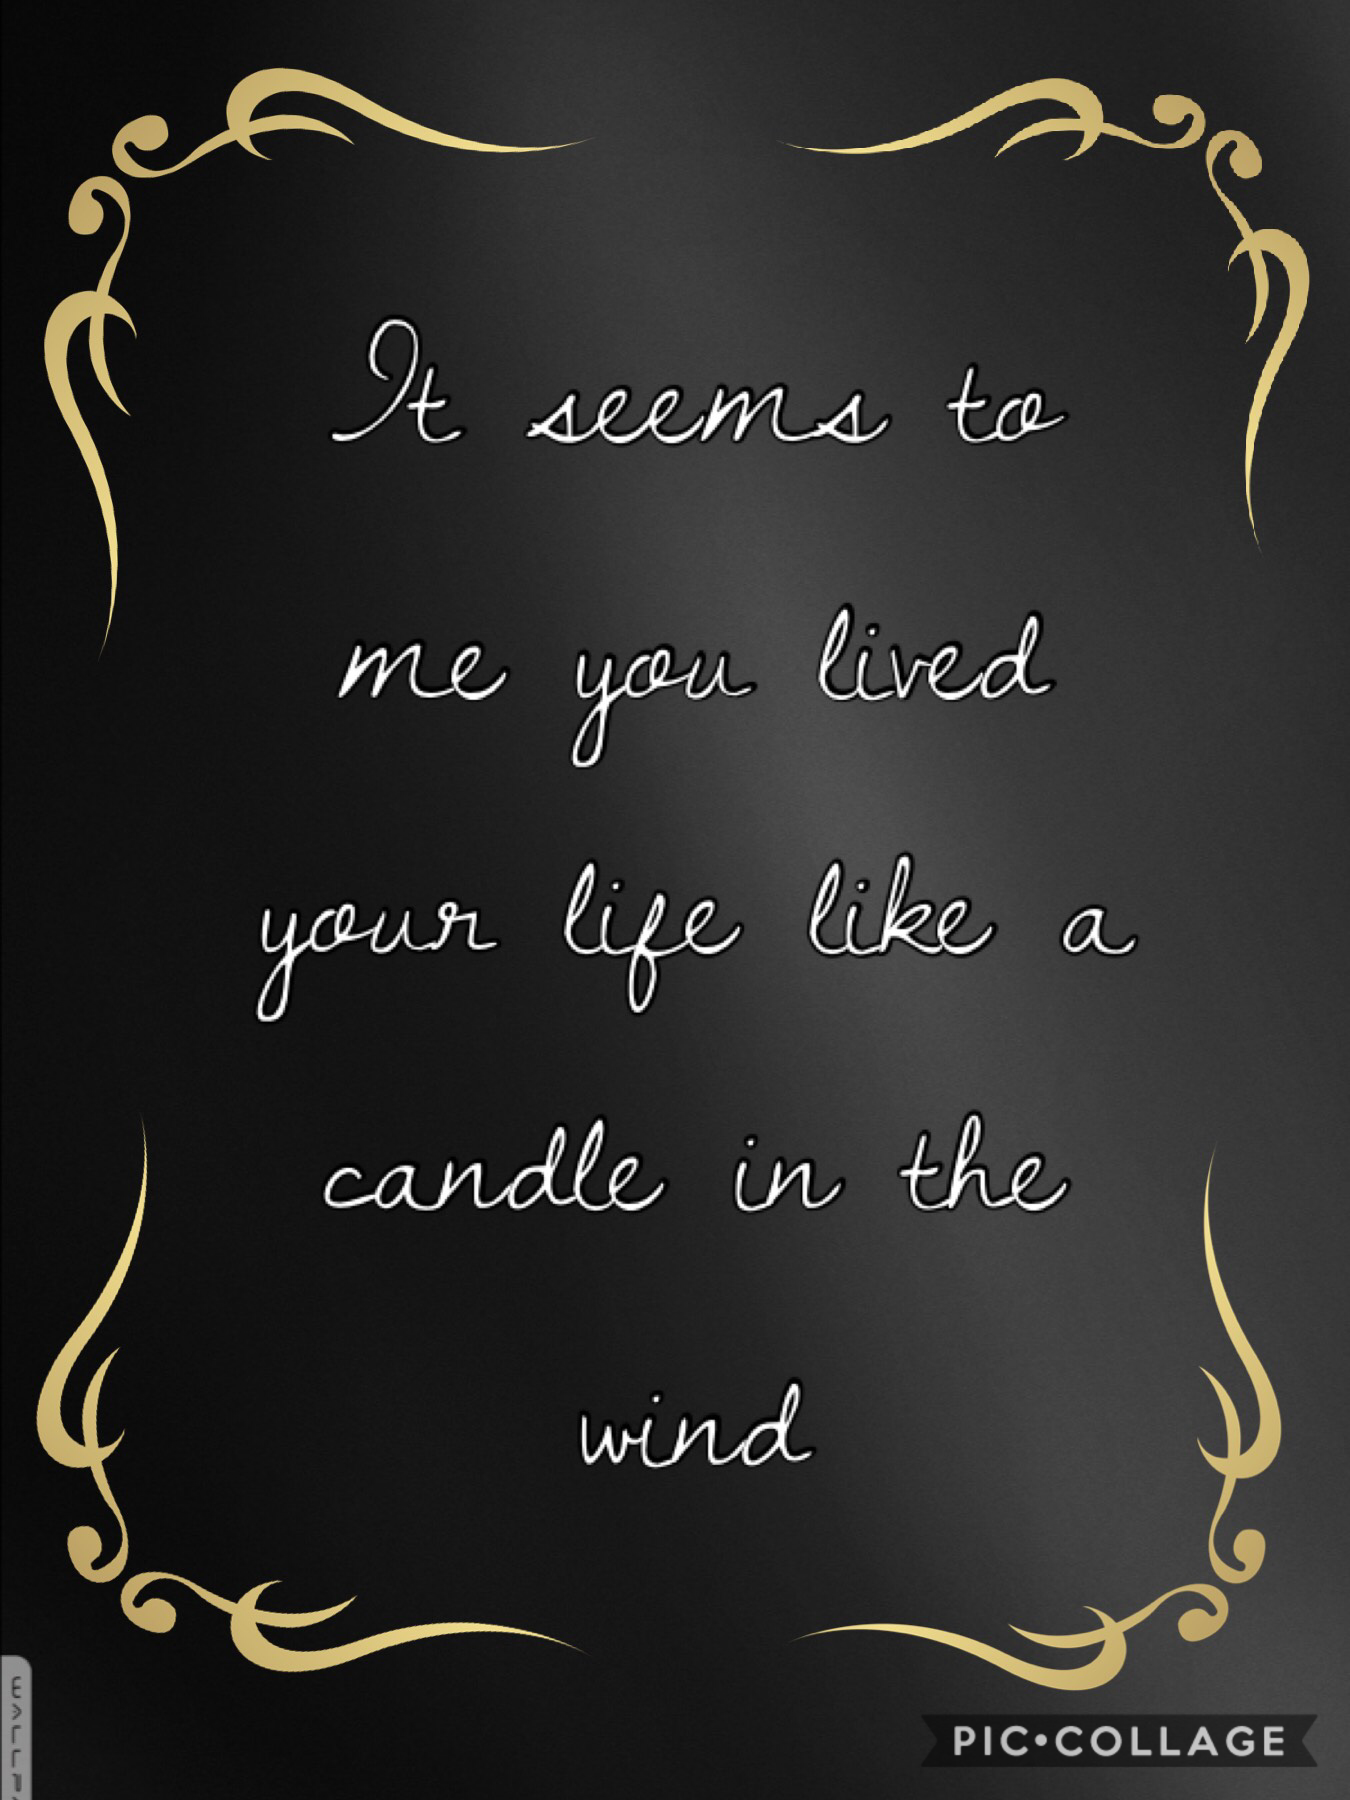 Candle in the Wind by Elton John